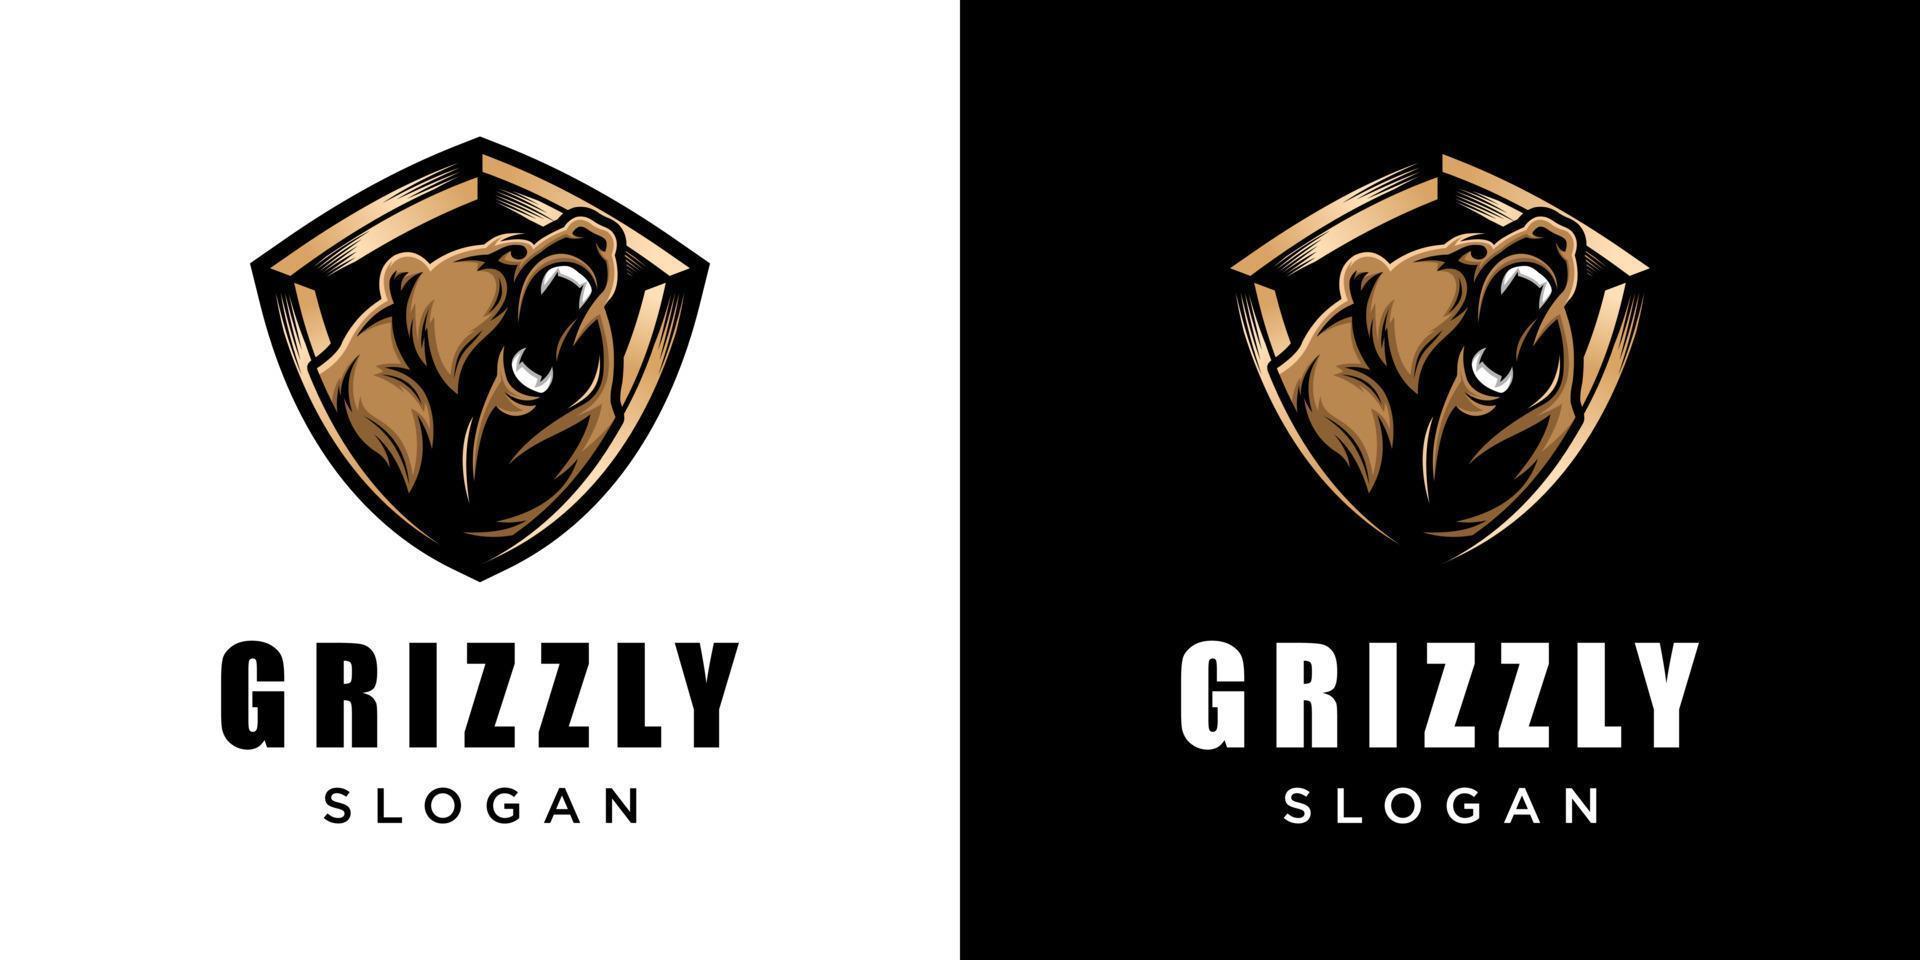 Grizzly Bear Head Animal Illustration Angry Strong Mascot with Shield Security Symbol Vector Logo Design